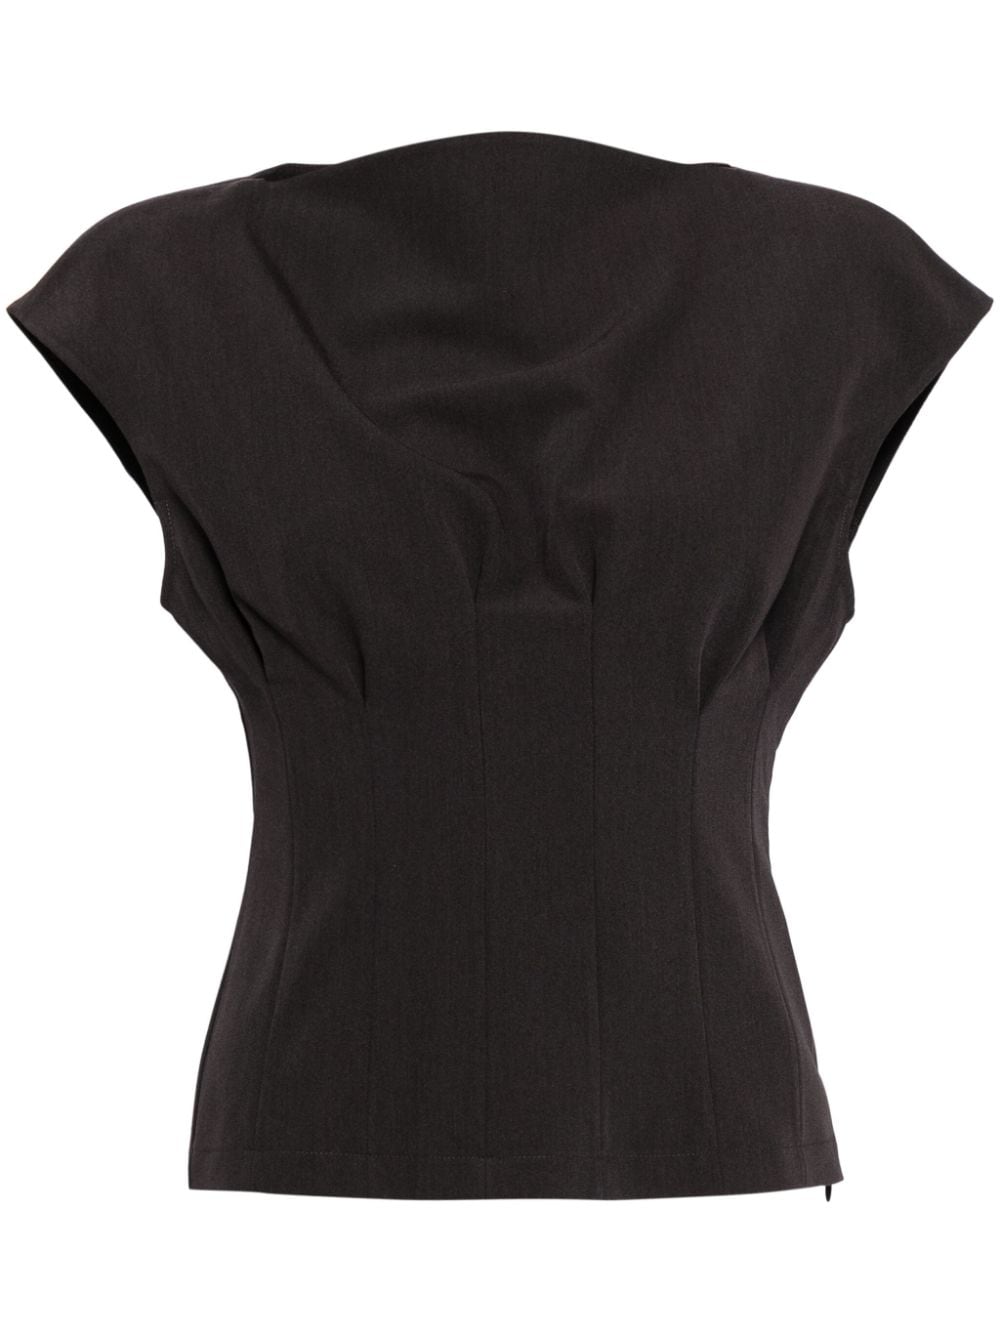 ruched-detailing sleeveless top